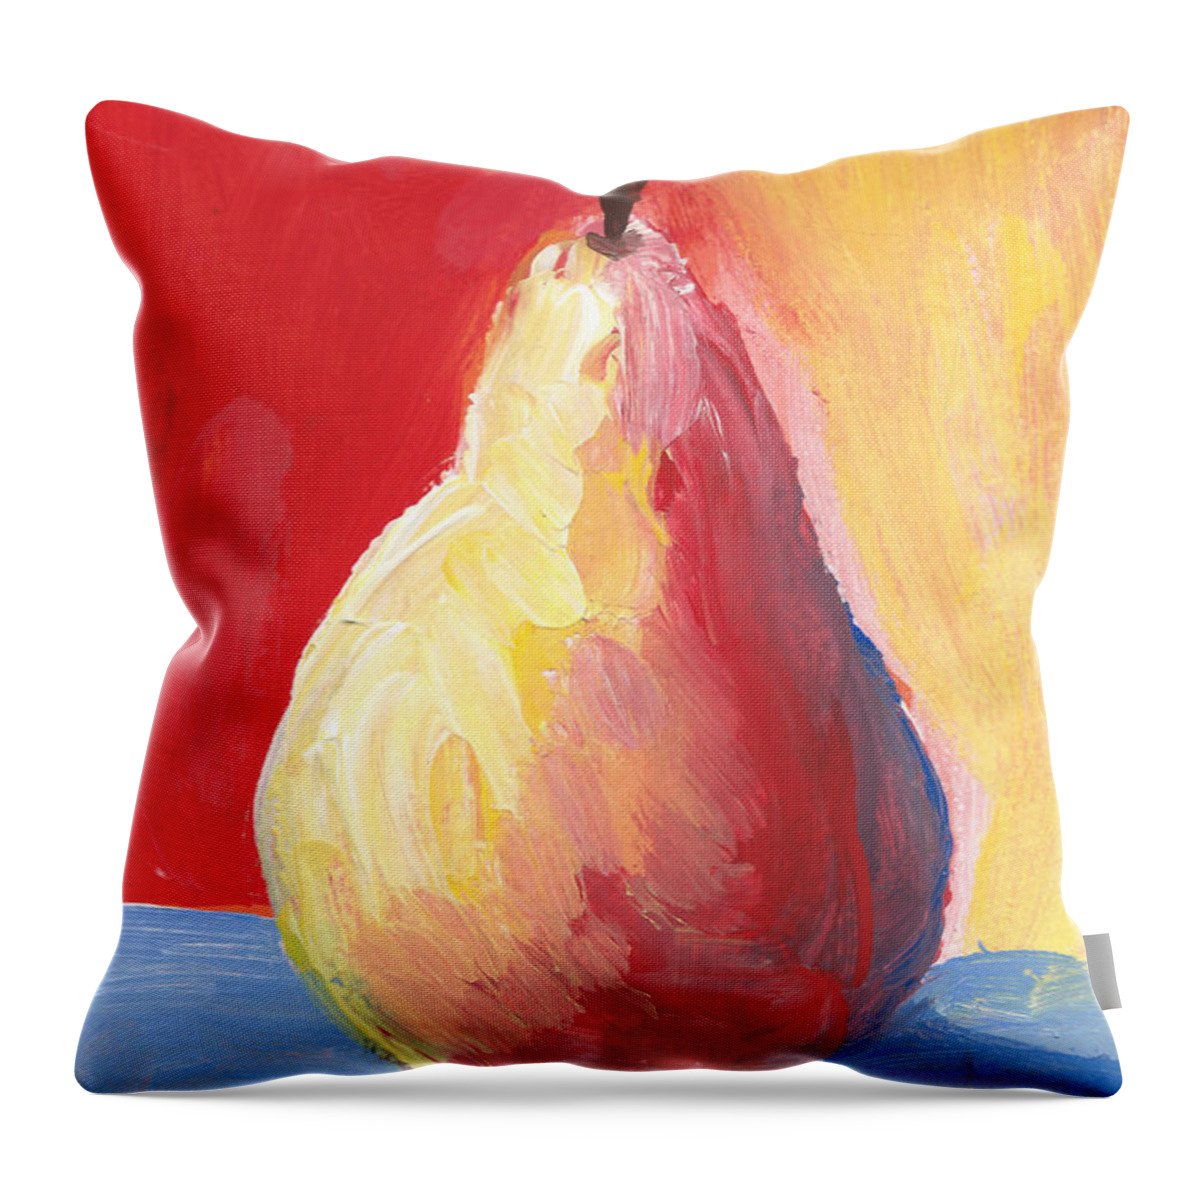 Pear Throw Pillow featuring the painting Pear 4 by Elise Boam